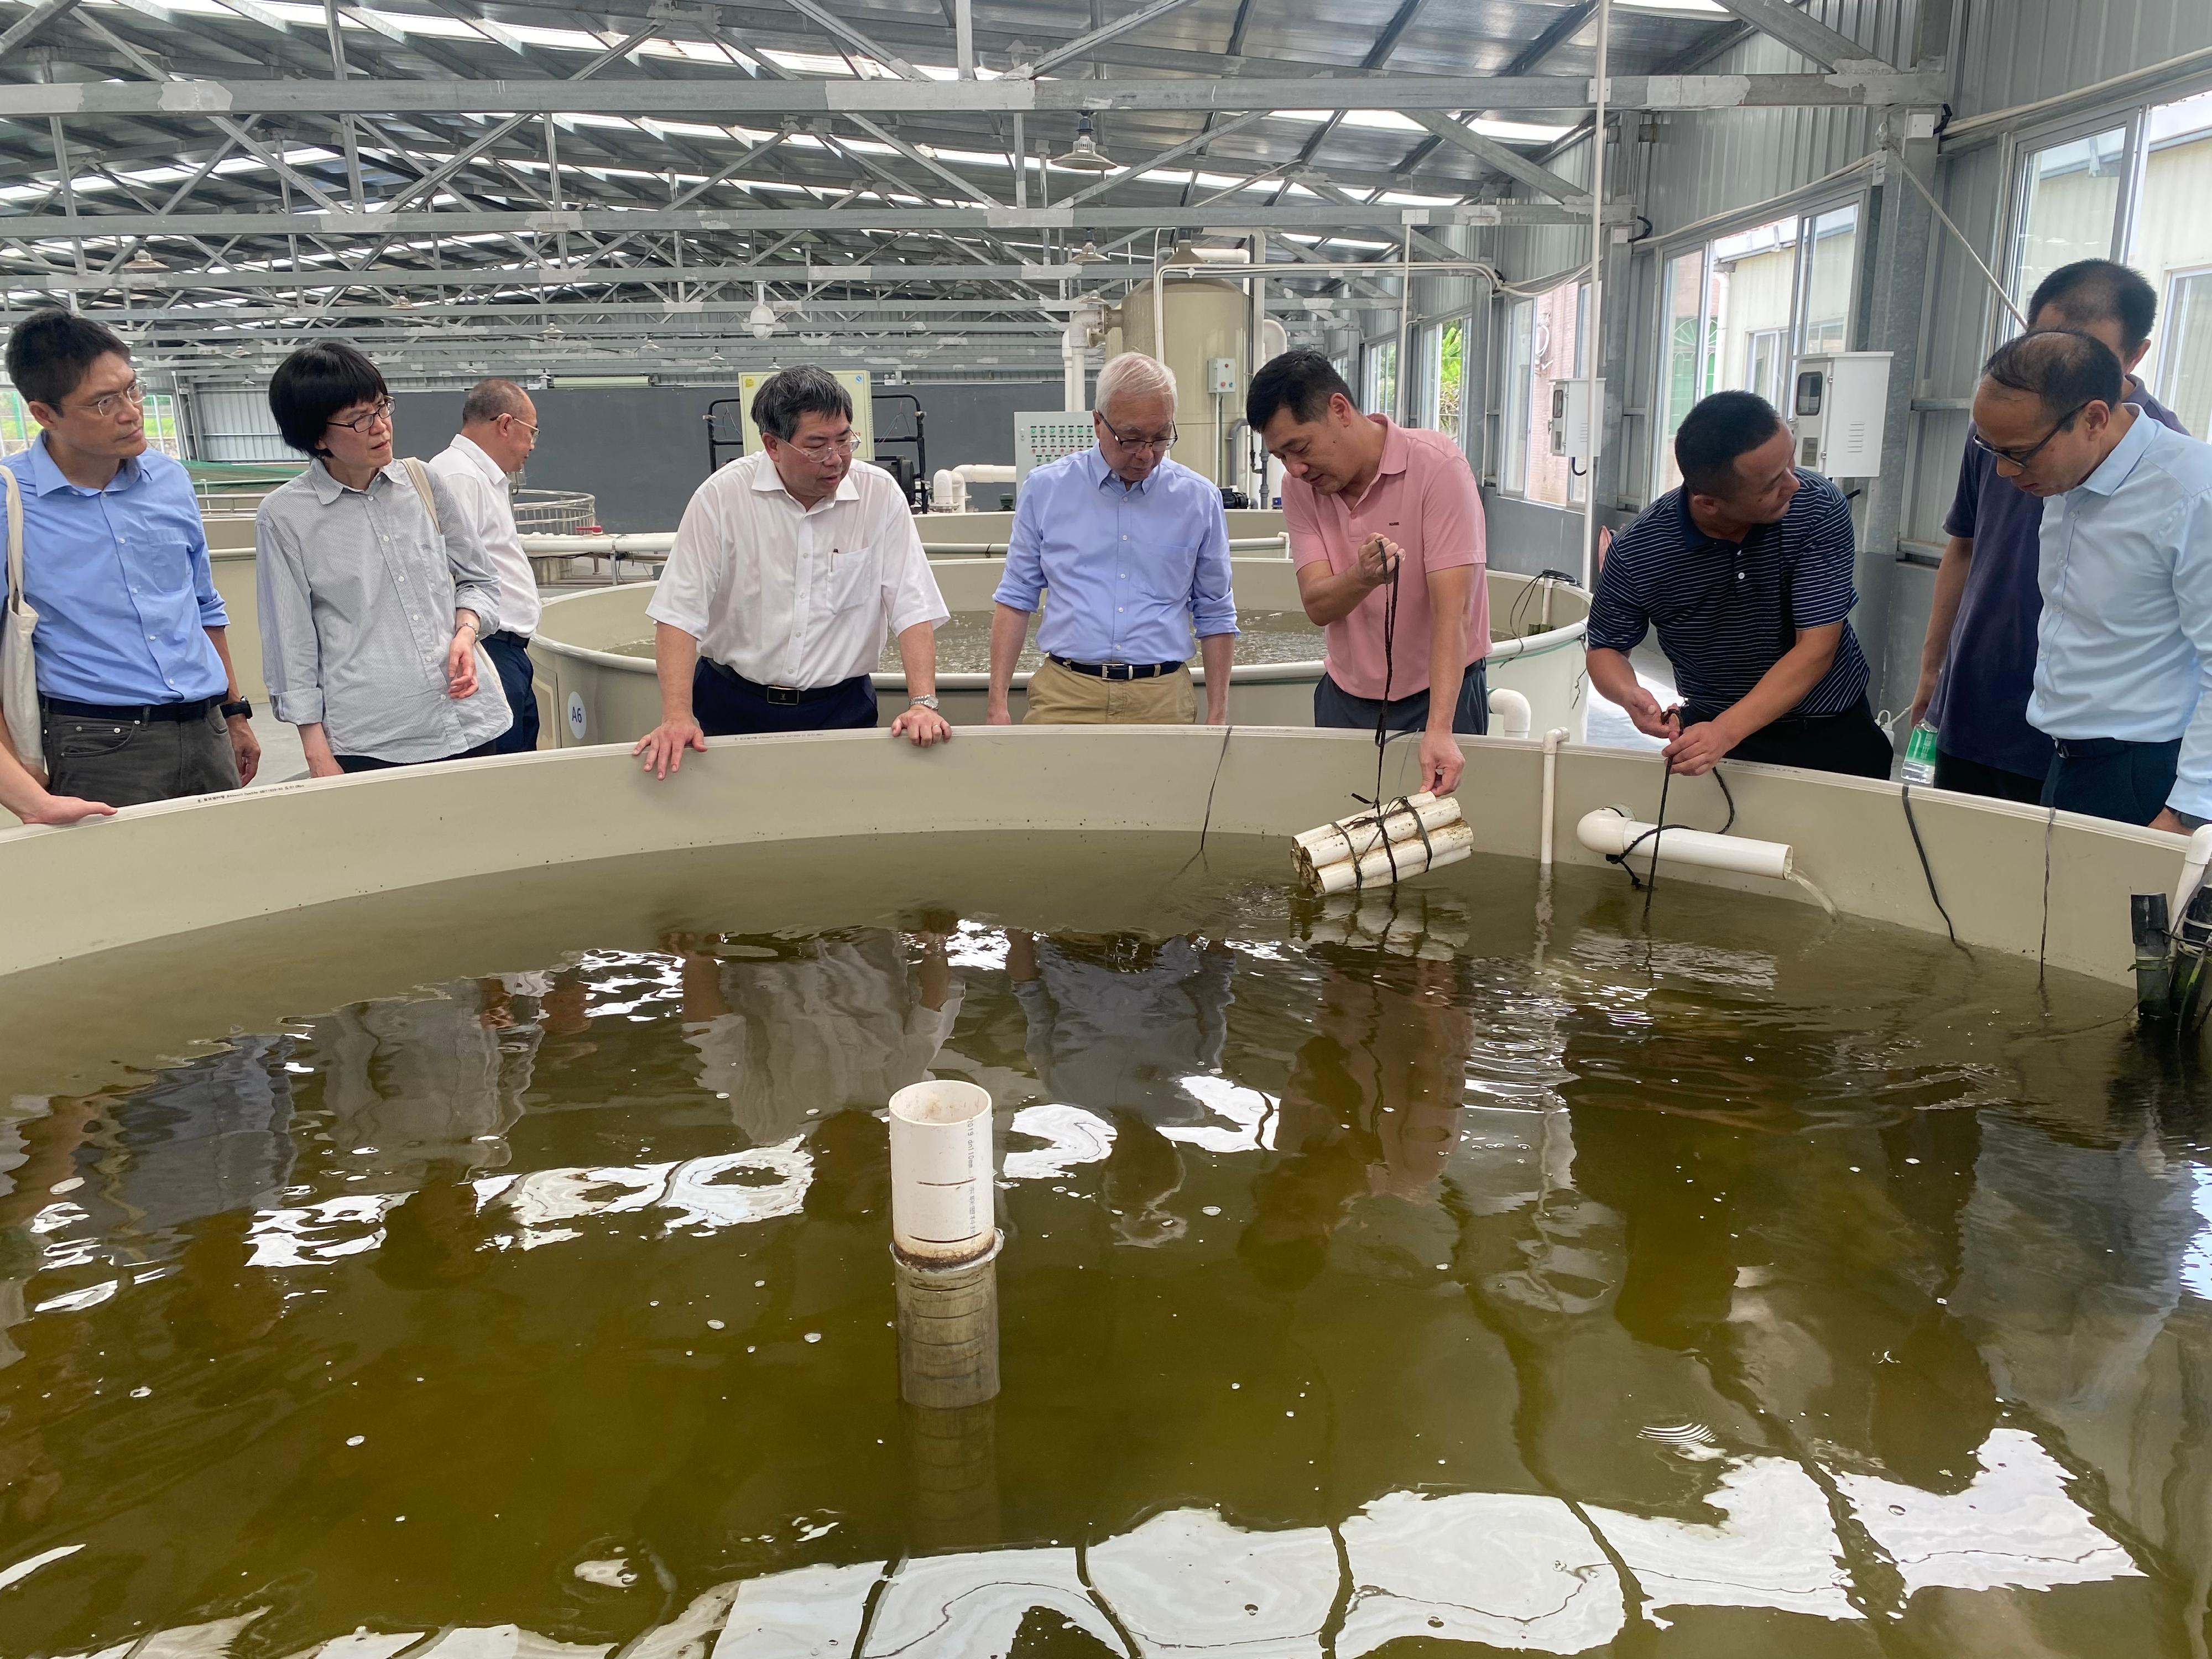 The Secretary for Environment and Ecology, Mr Tse Chin-wan, visited the Guangdong International Fishery High Tech Park yesterday afternoon (July 19). Photo shows Mr Tse (fifth right); the Permanent Secretary for Environment and Ecology (Food), Miss Vivian Lau (second left); and the Director of Agriculture, Fisheries and Conservation, Dr Leung Siu-fai (sixth right), receiving a briefing from a representative on the farming system adopted in the Park.